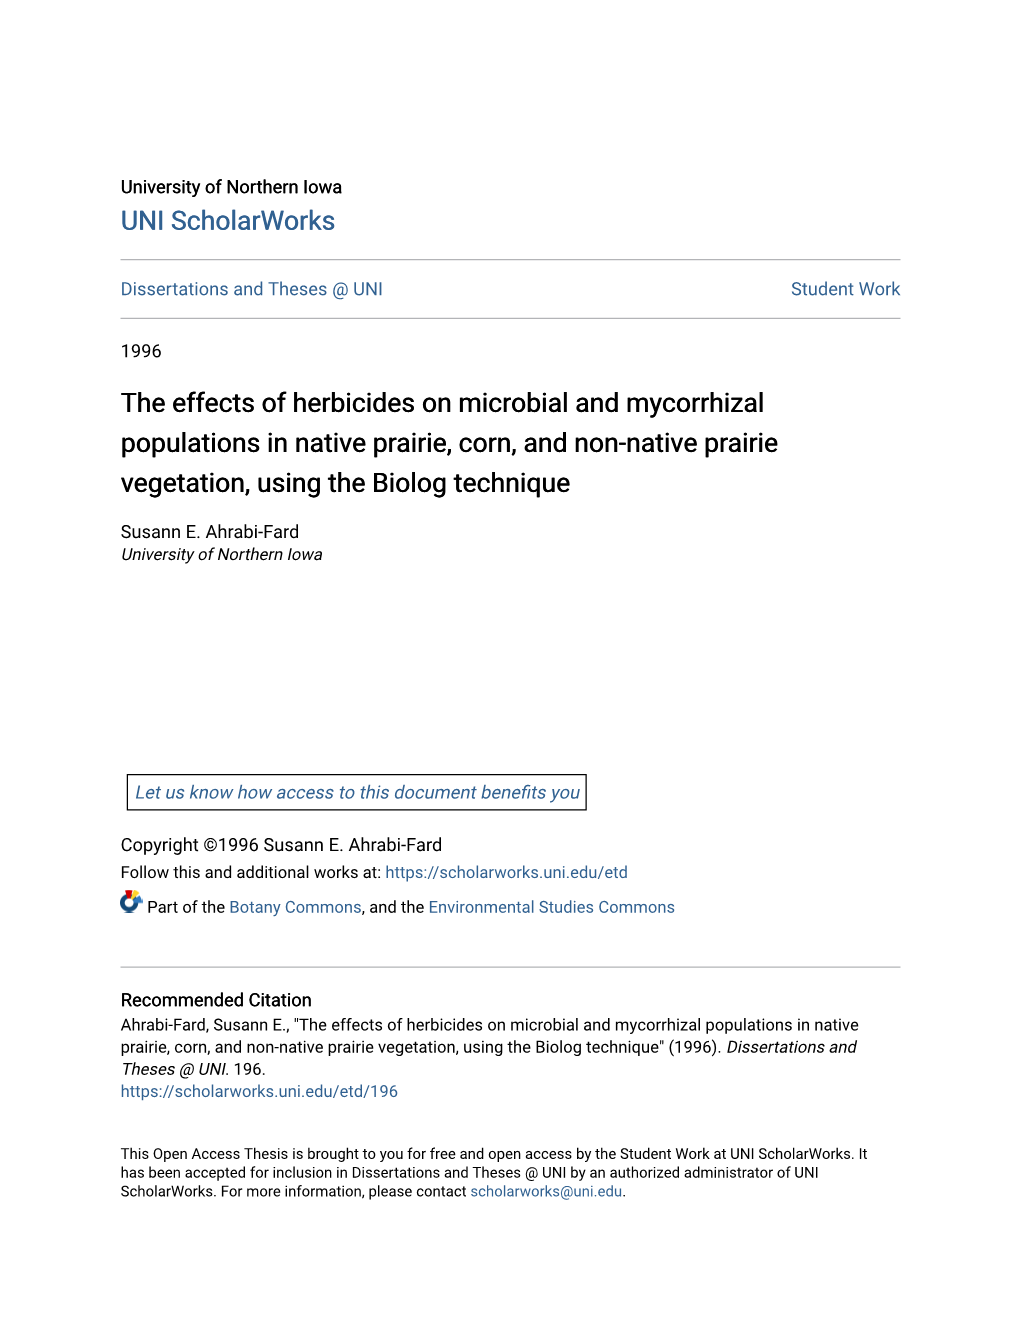 The Effects of Herbicides on Microbial and Mycorrhizal Populations in Native Prairie, Corn, and Non-Native Prairie Vegetation, Using the Biolog Technique